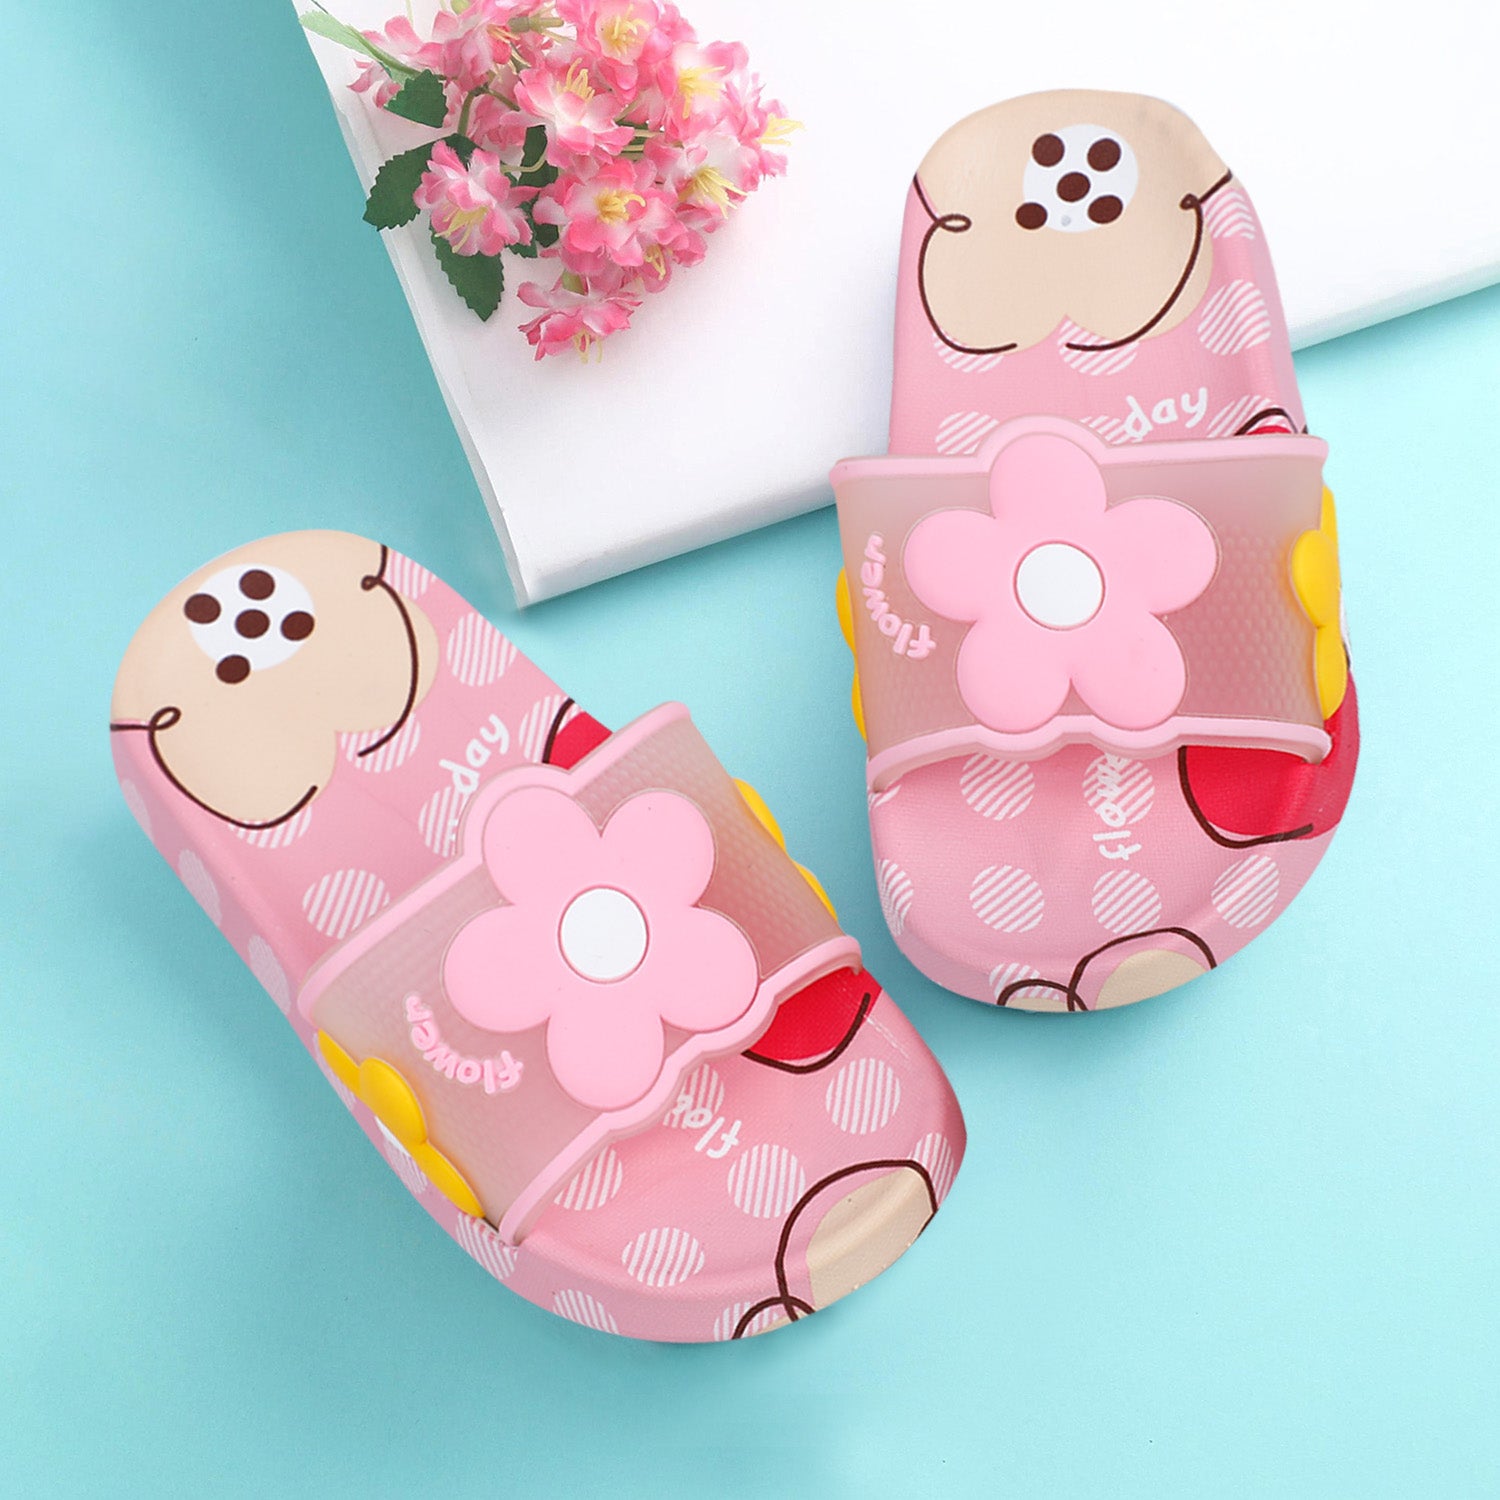 Share 233+ slippers for small girls latest